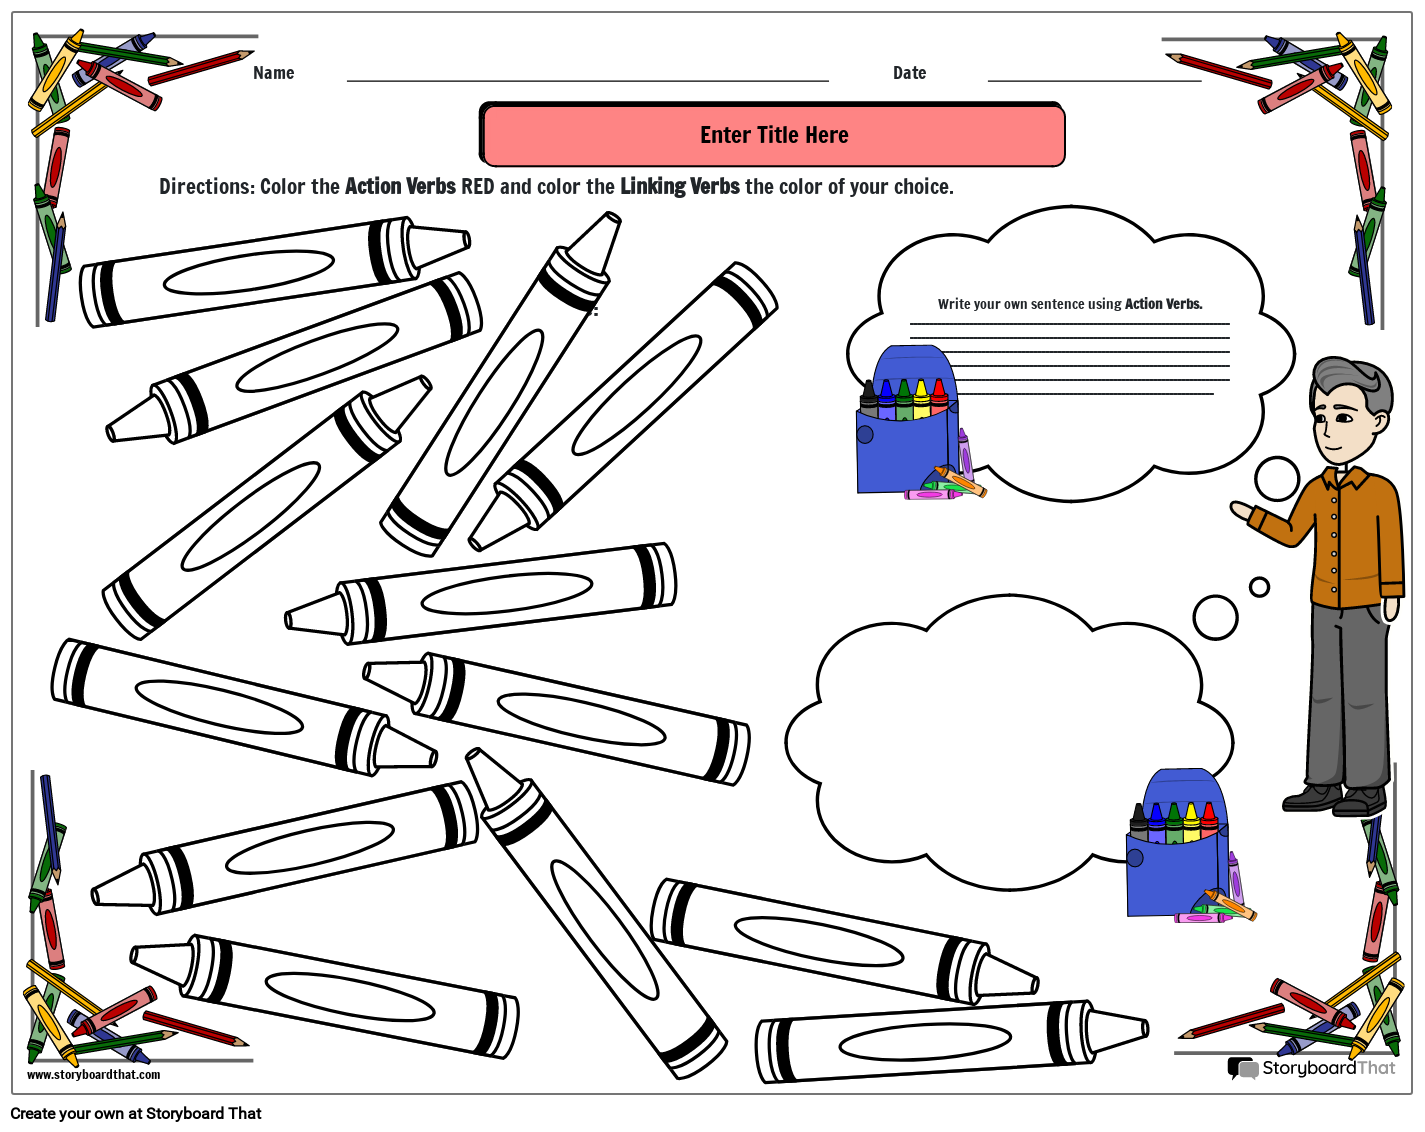 Action and Linking Verbs - Grammar Worksheet with Crayons